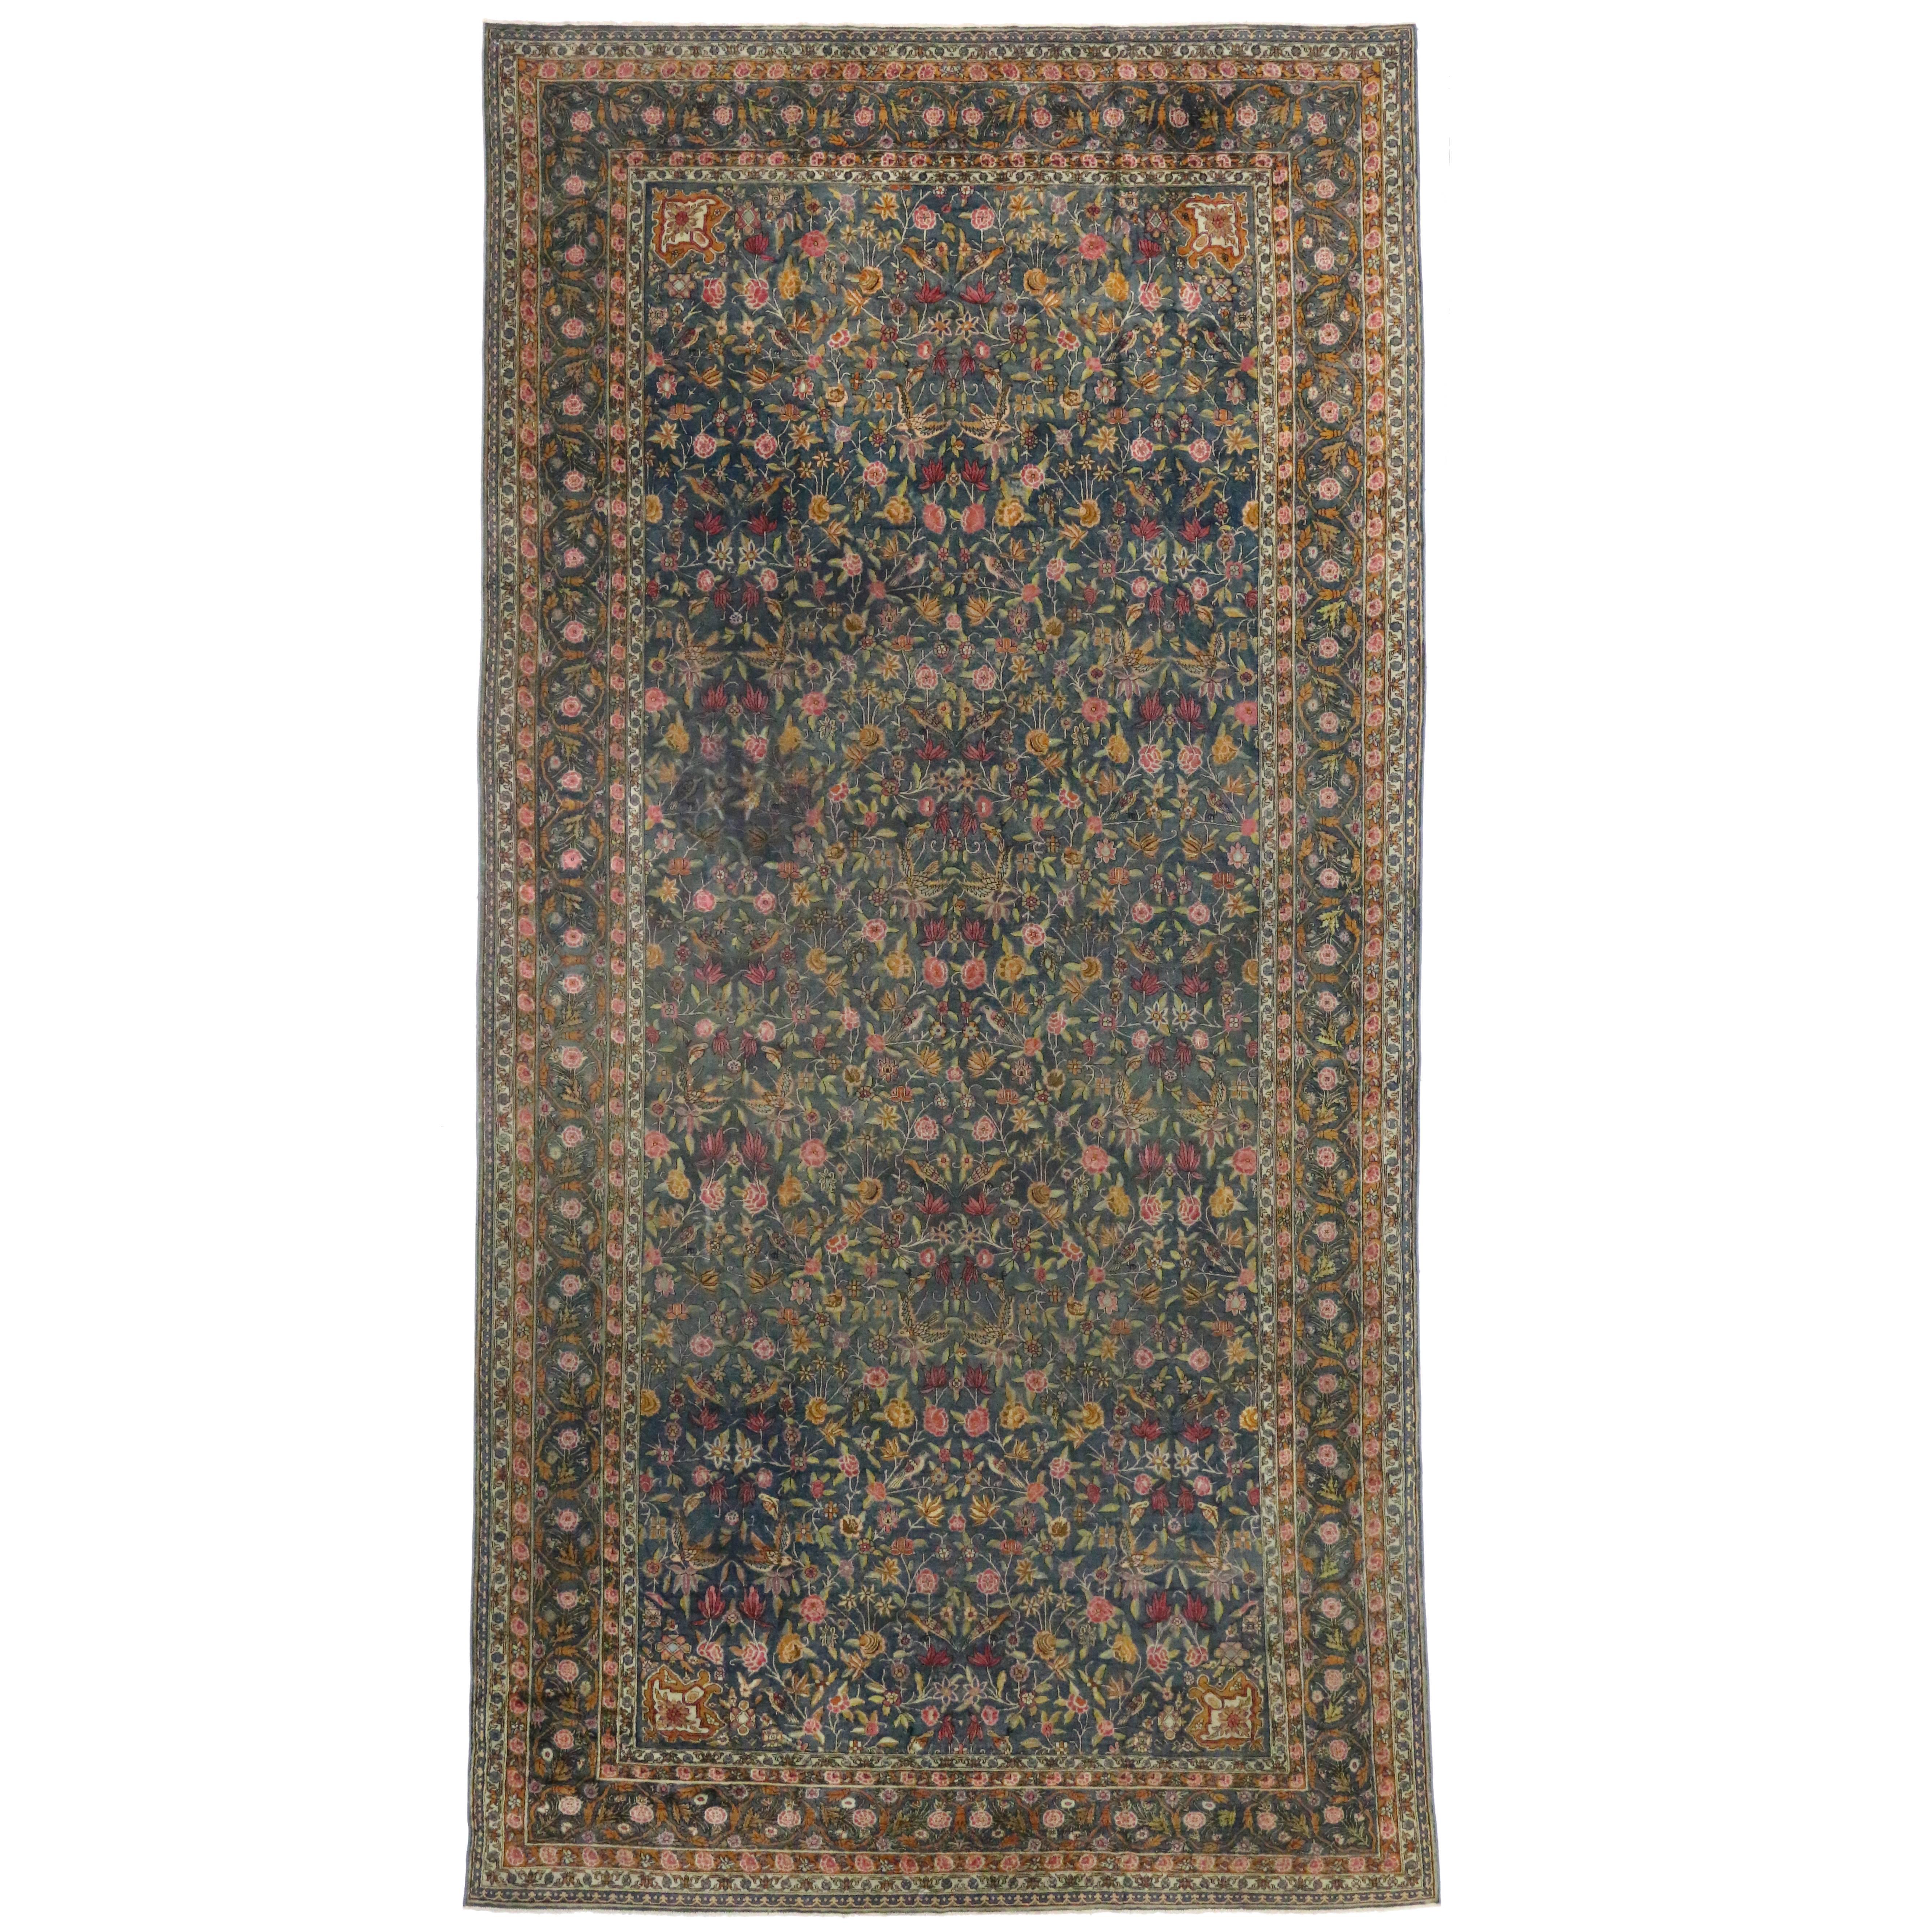 Antique Indian Agra Palace Size Rug with Rococo Regency Style